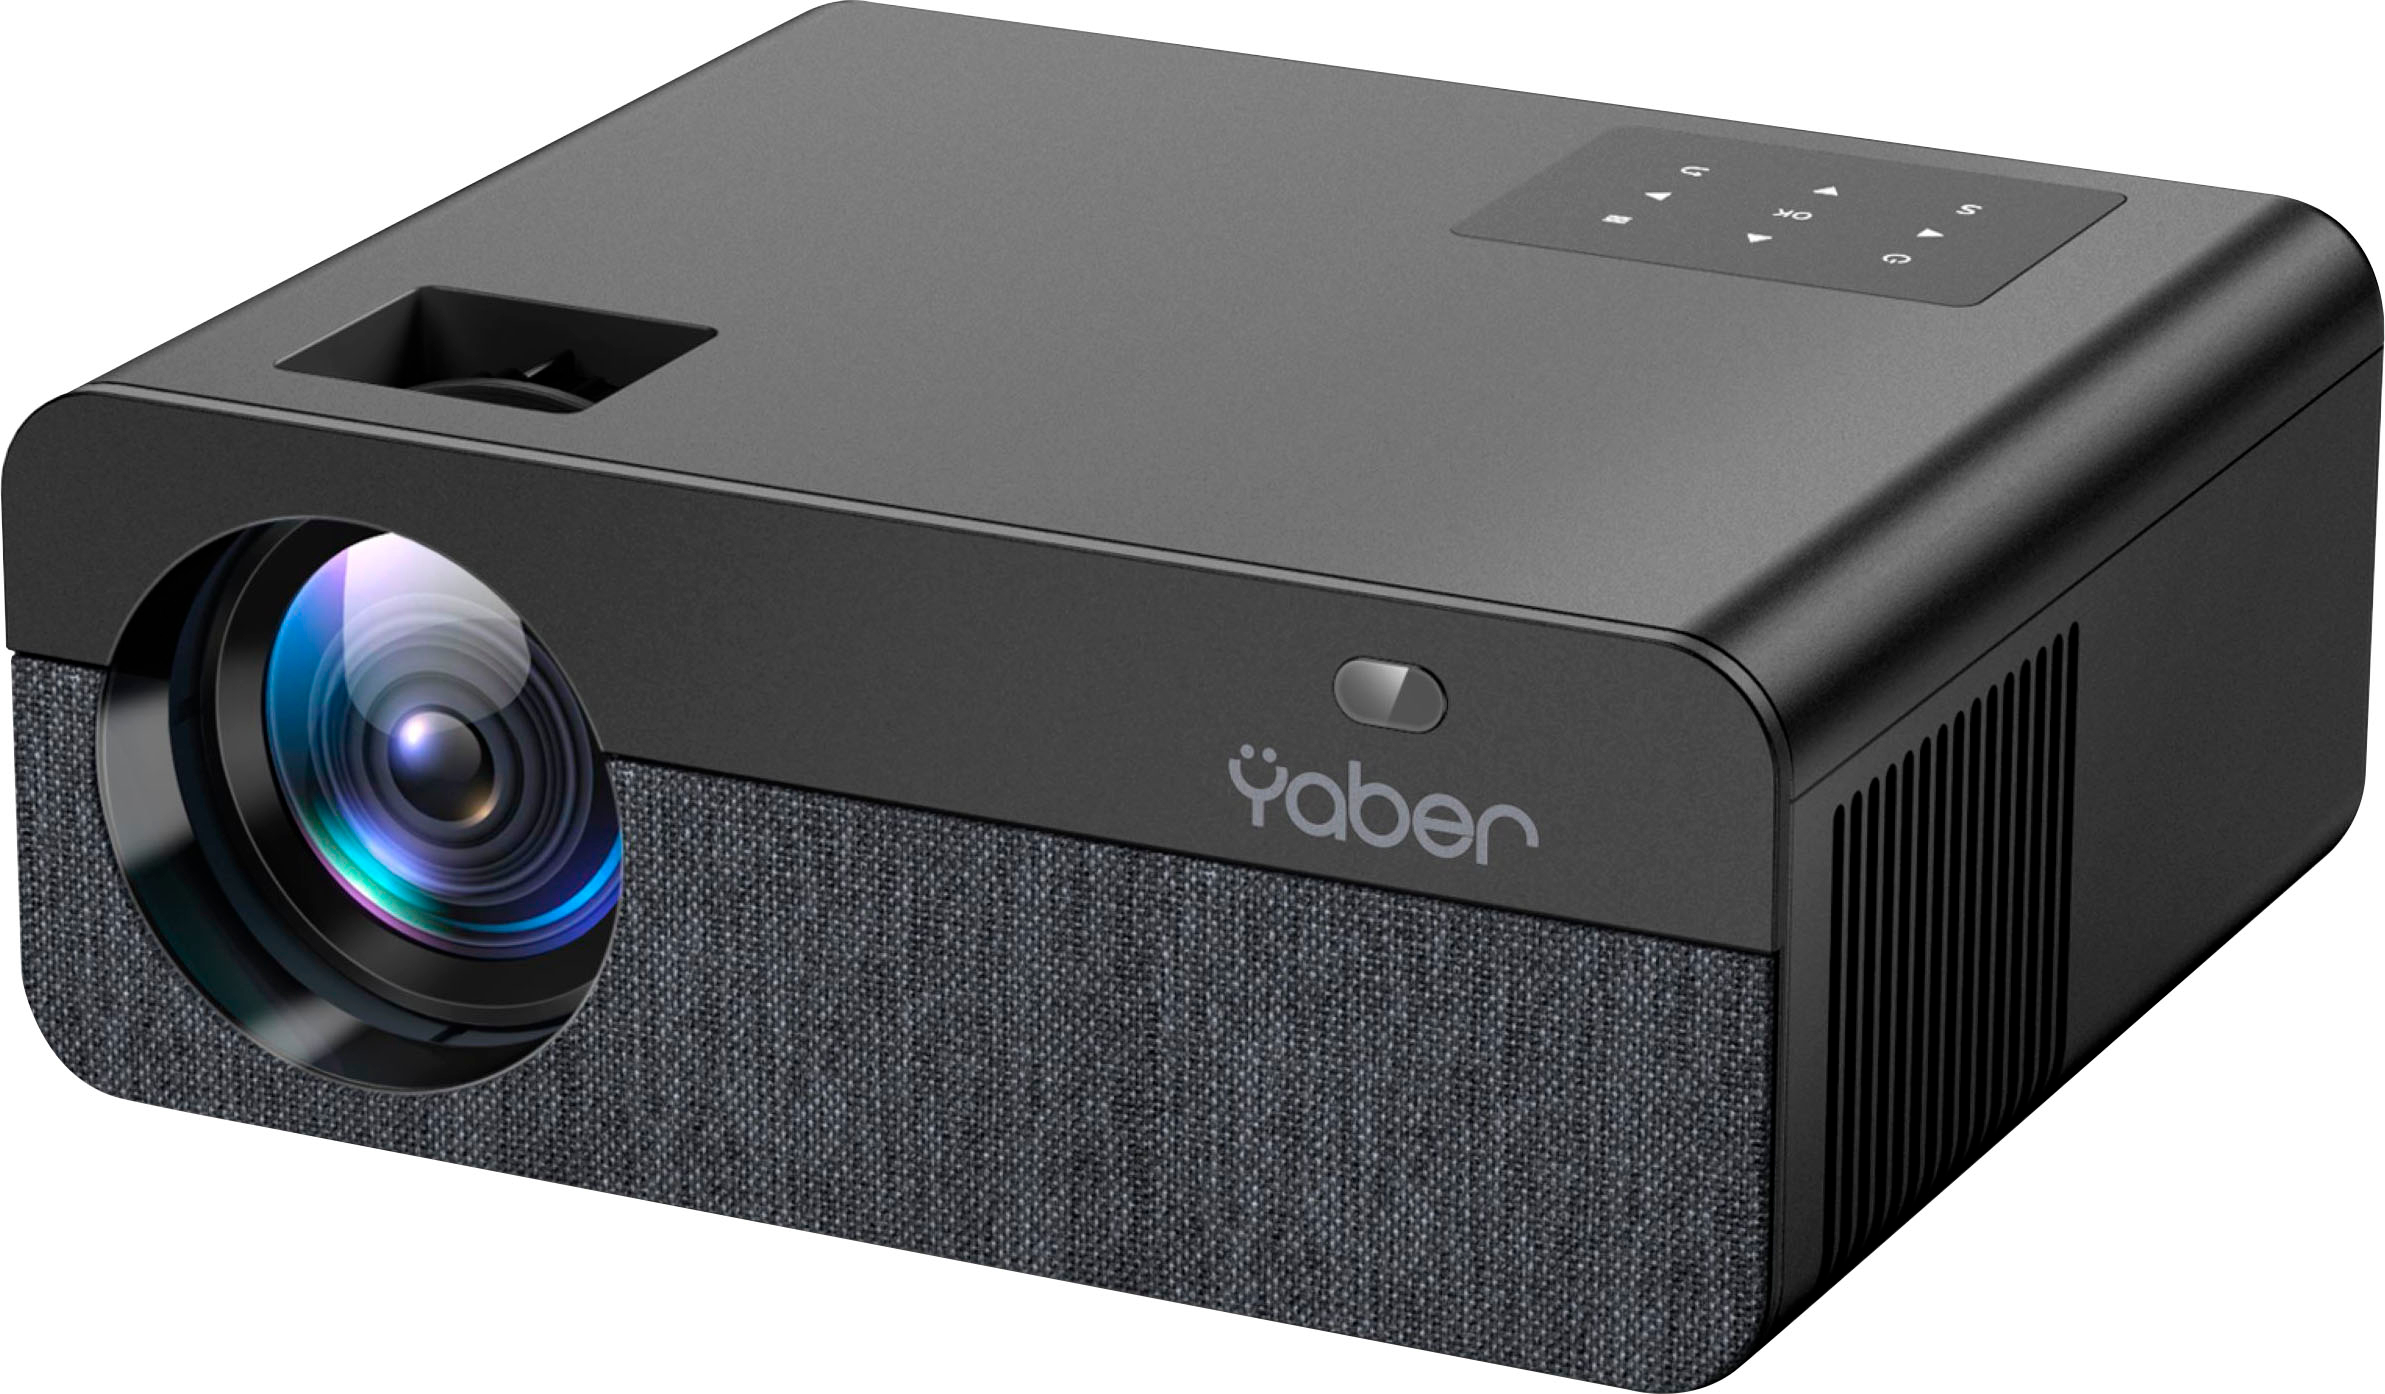 YABER projectors have massive discounts in this last-minute Christmas sale